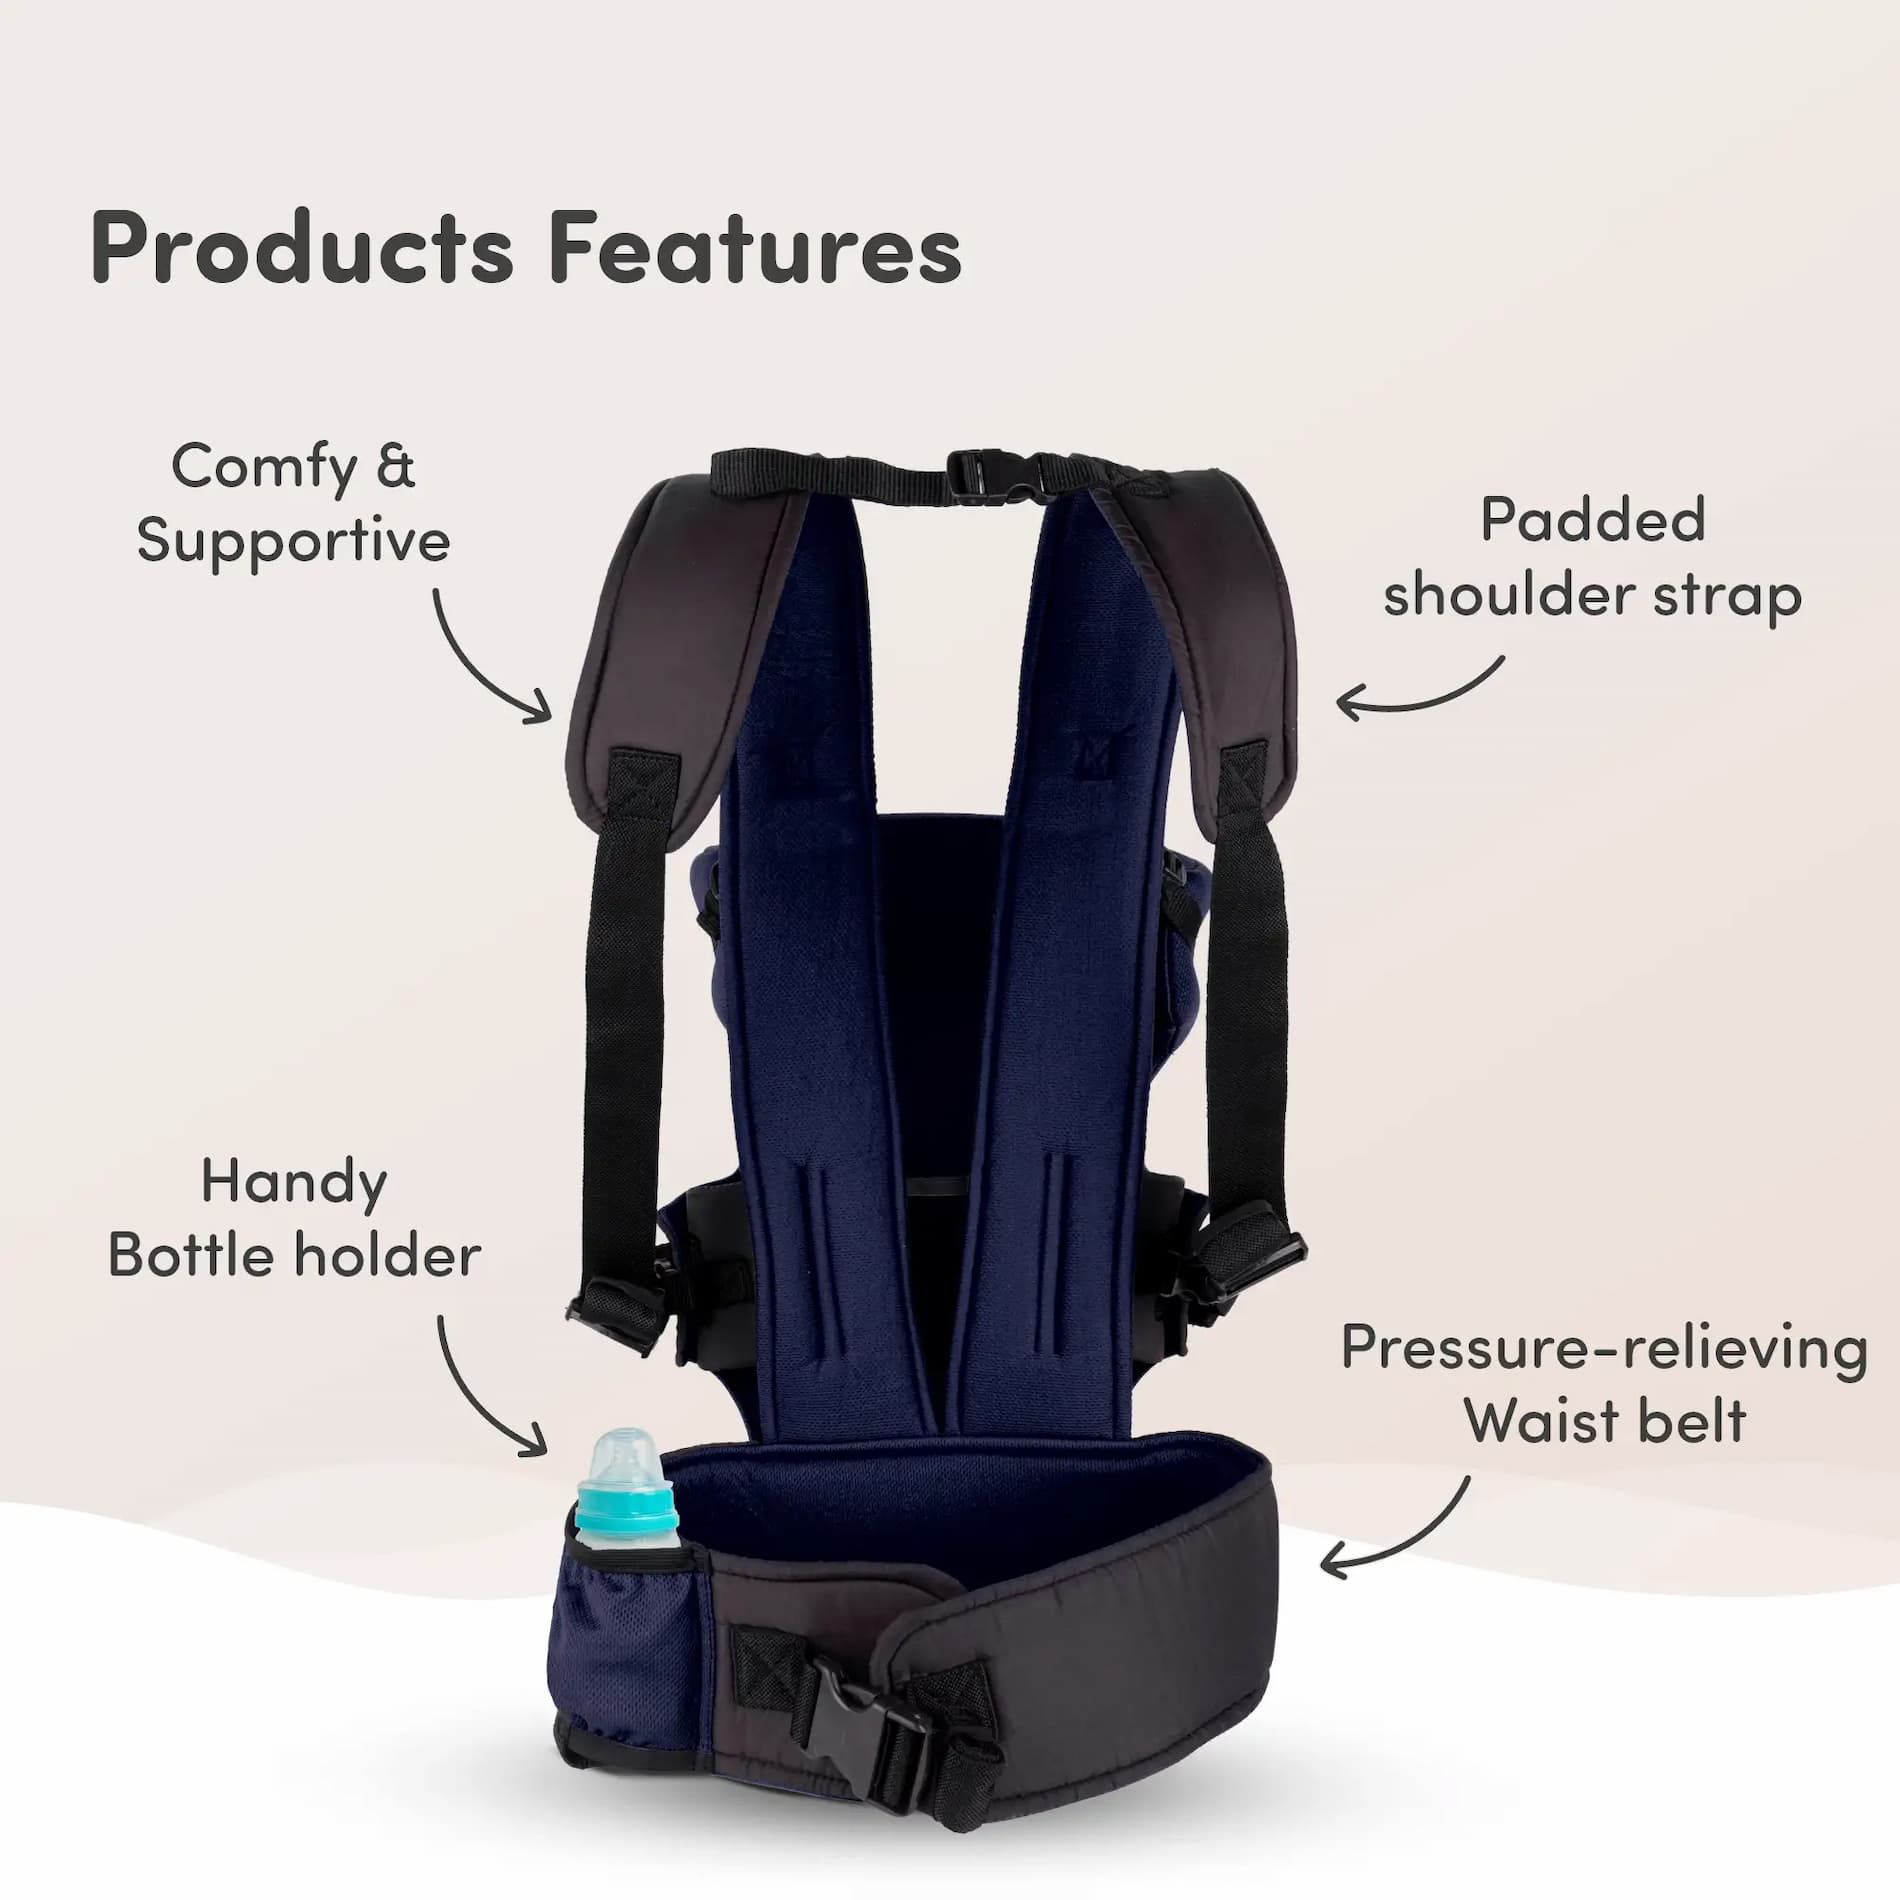 Baby Carrier Bag for 0 to 3 Years with 4 Comfortable Carrying Positions | Lightweight & Travel Friendly | Padded Neck & Shoulder Support - Blue & Black